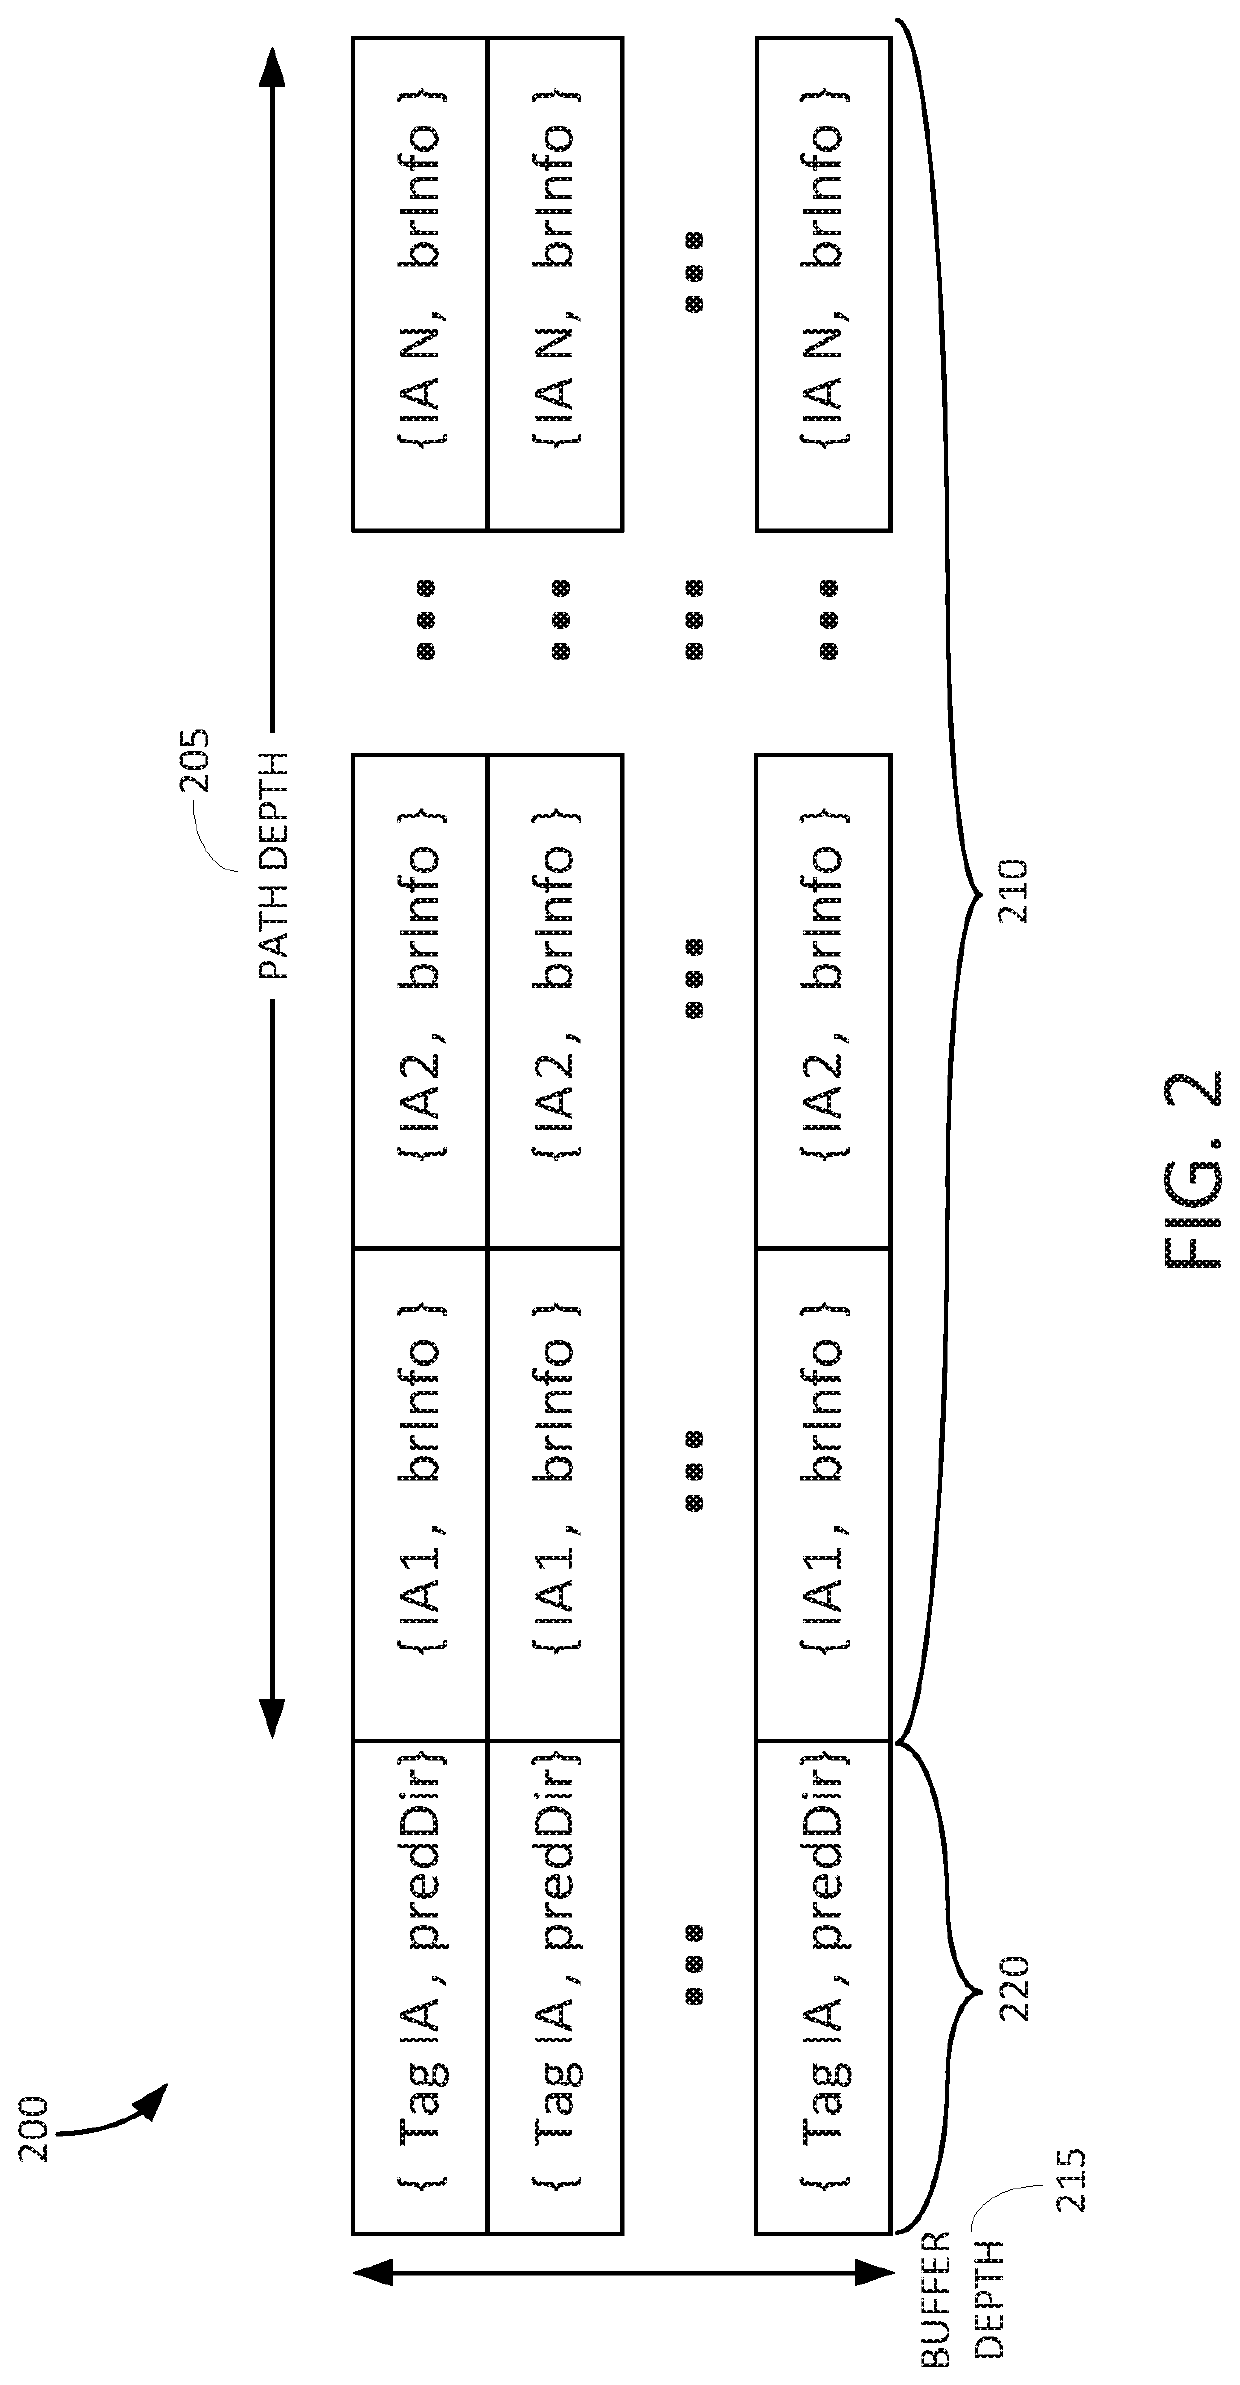 Mispredict recovery apparatus and method for branch and fetch pipelines